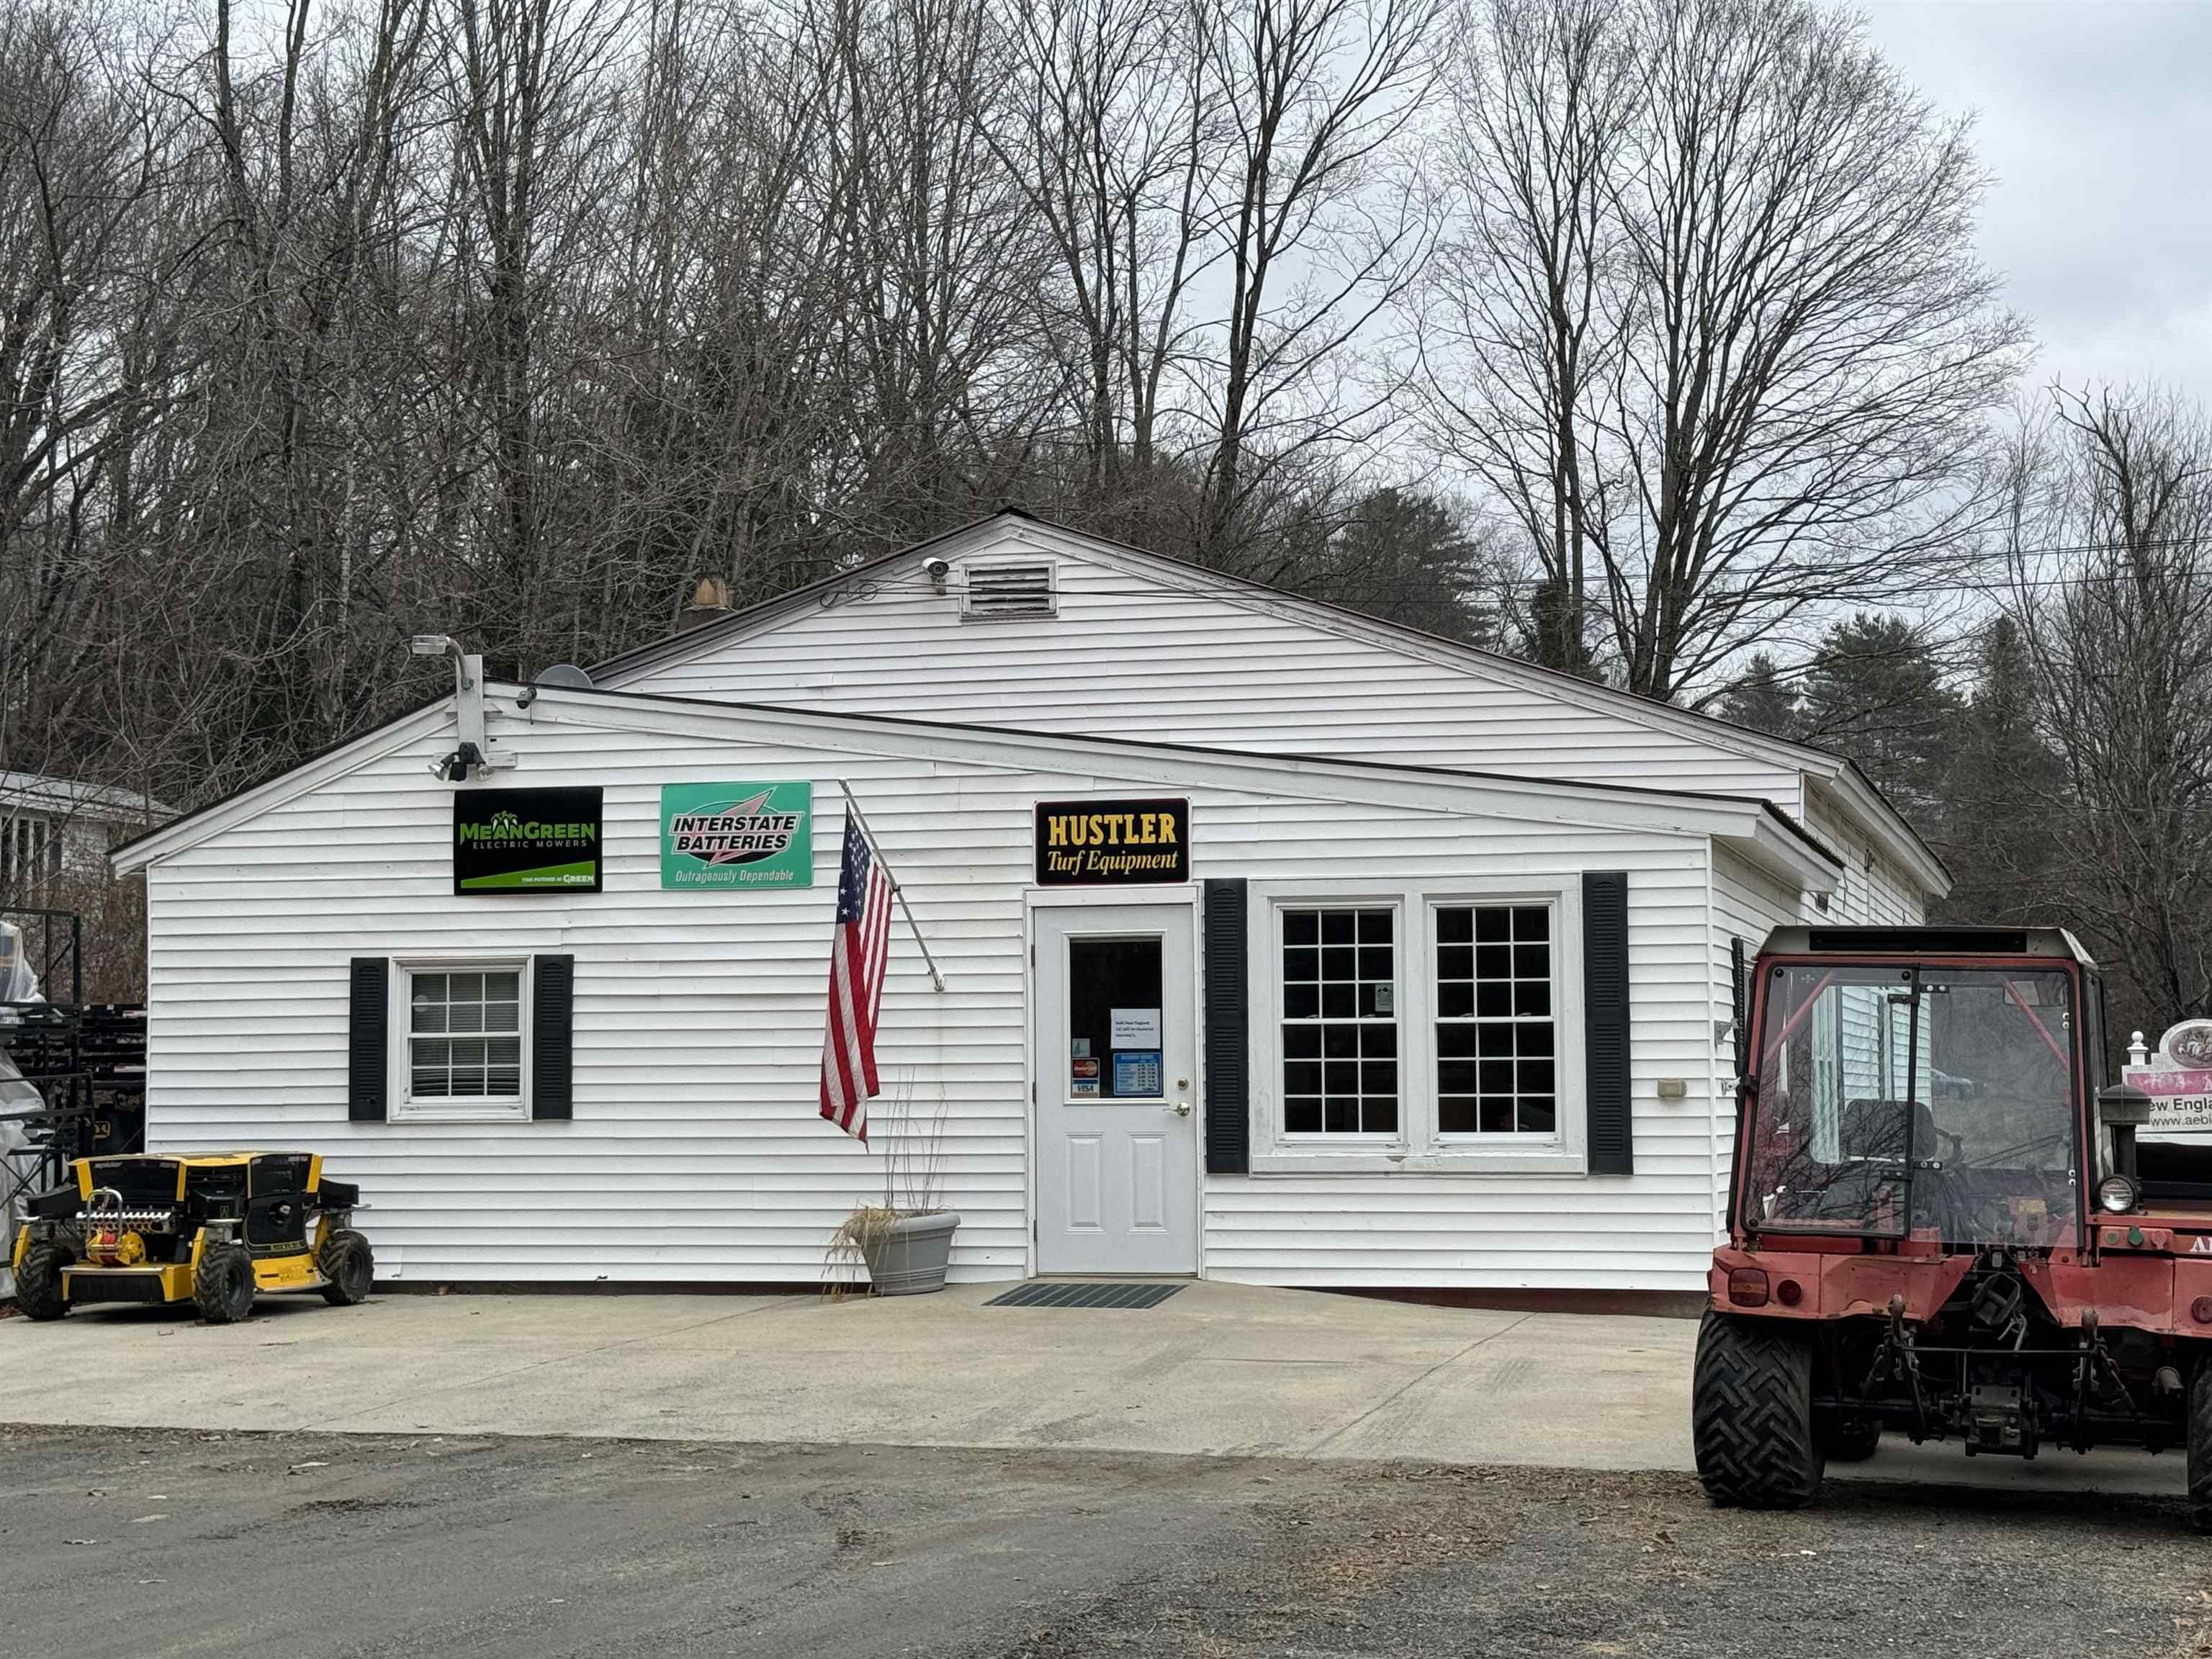 ALSTEAD NH Commercial Property for sale $$225,000 | $97 per sq.ft.